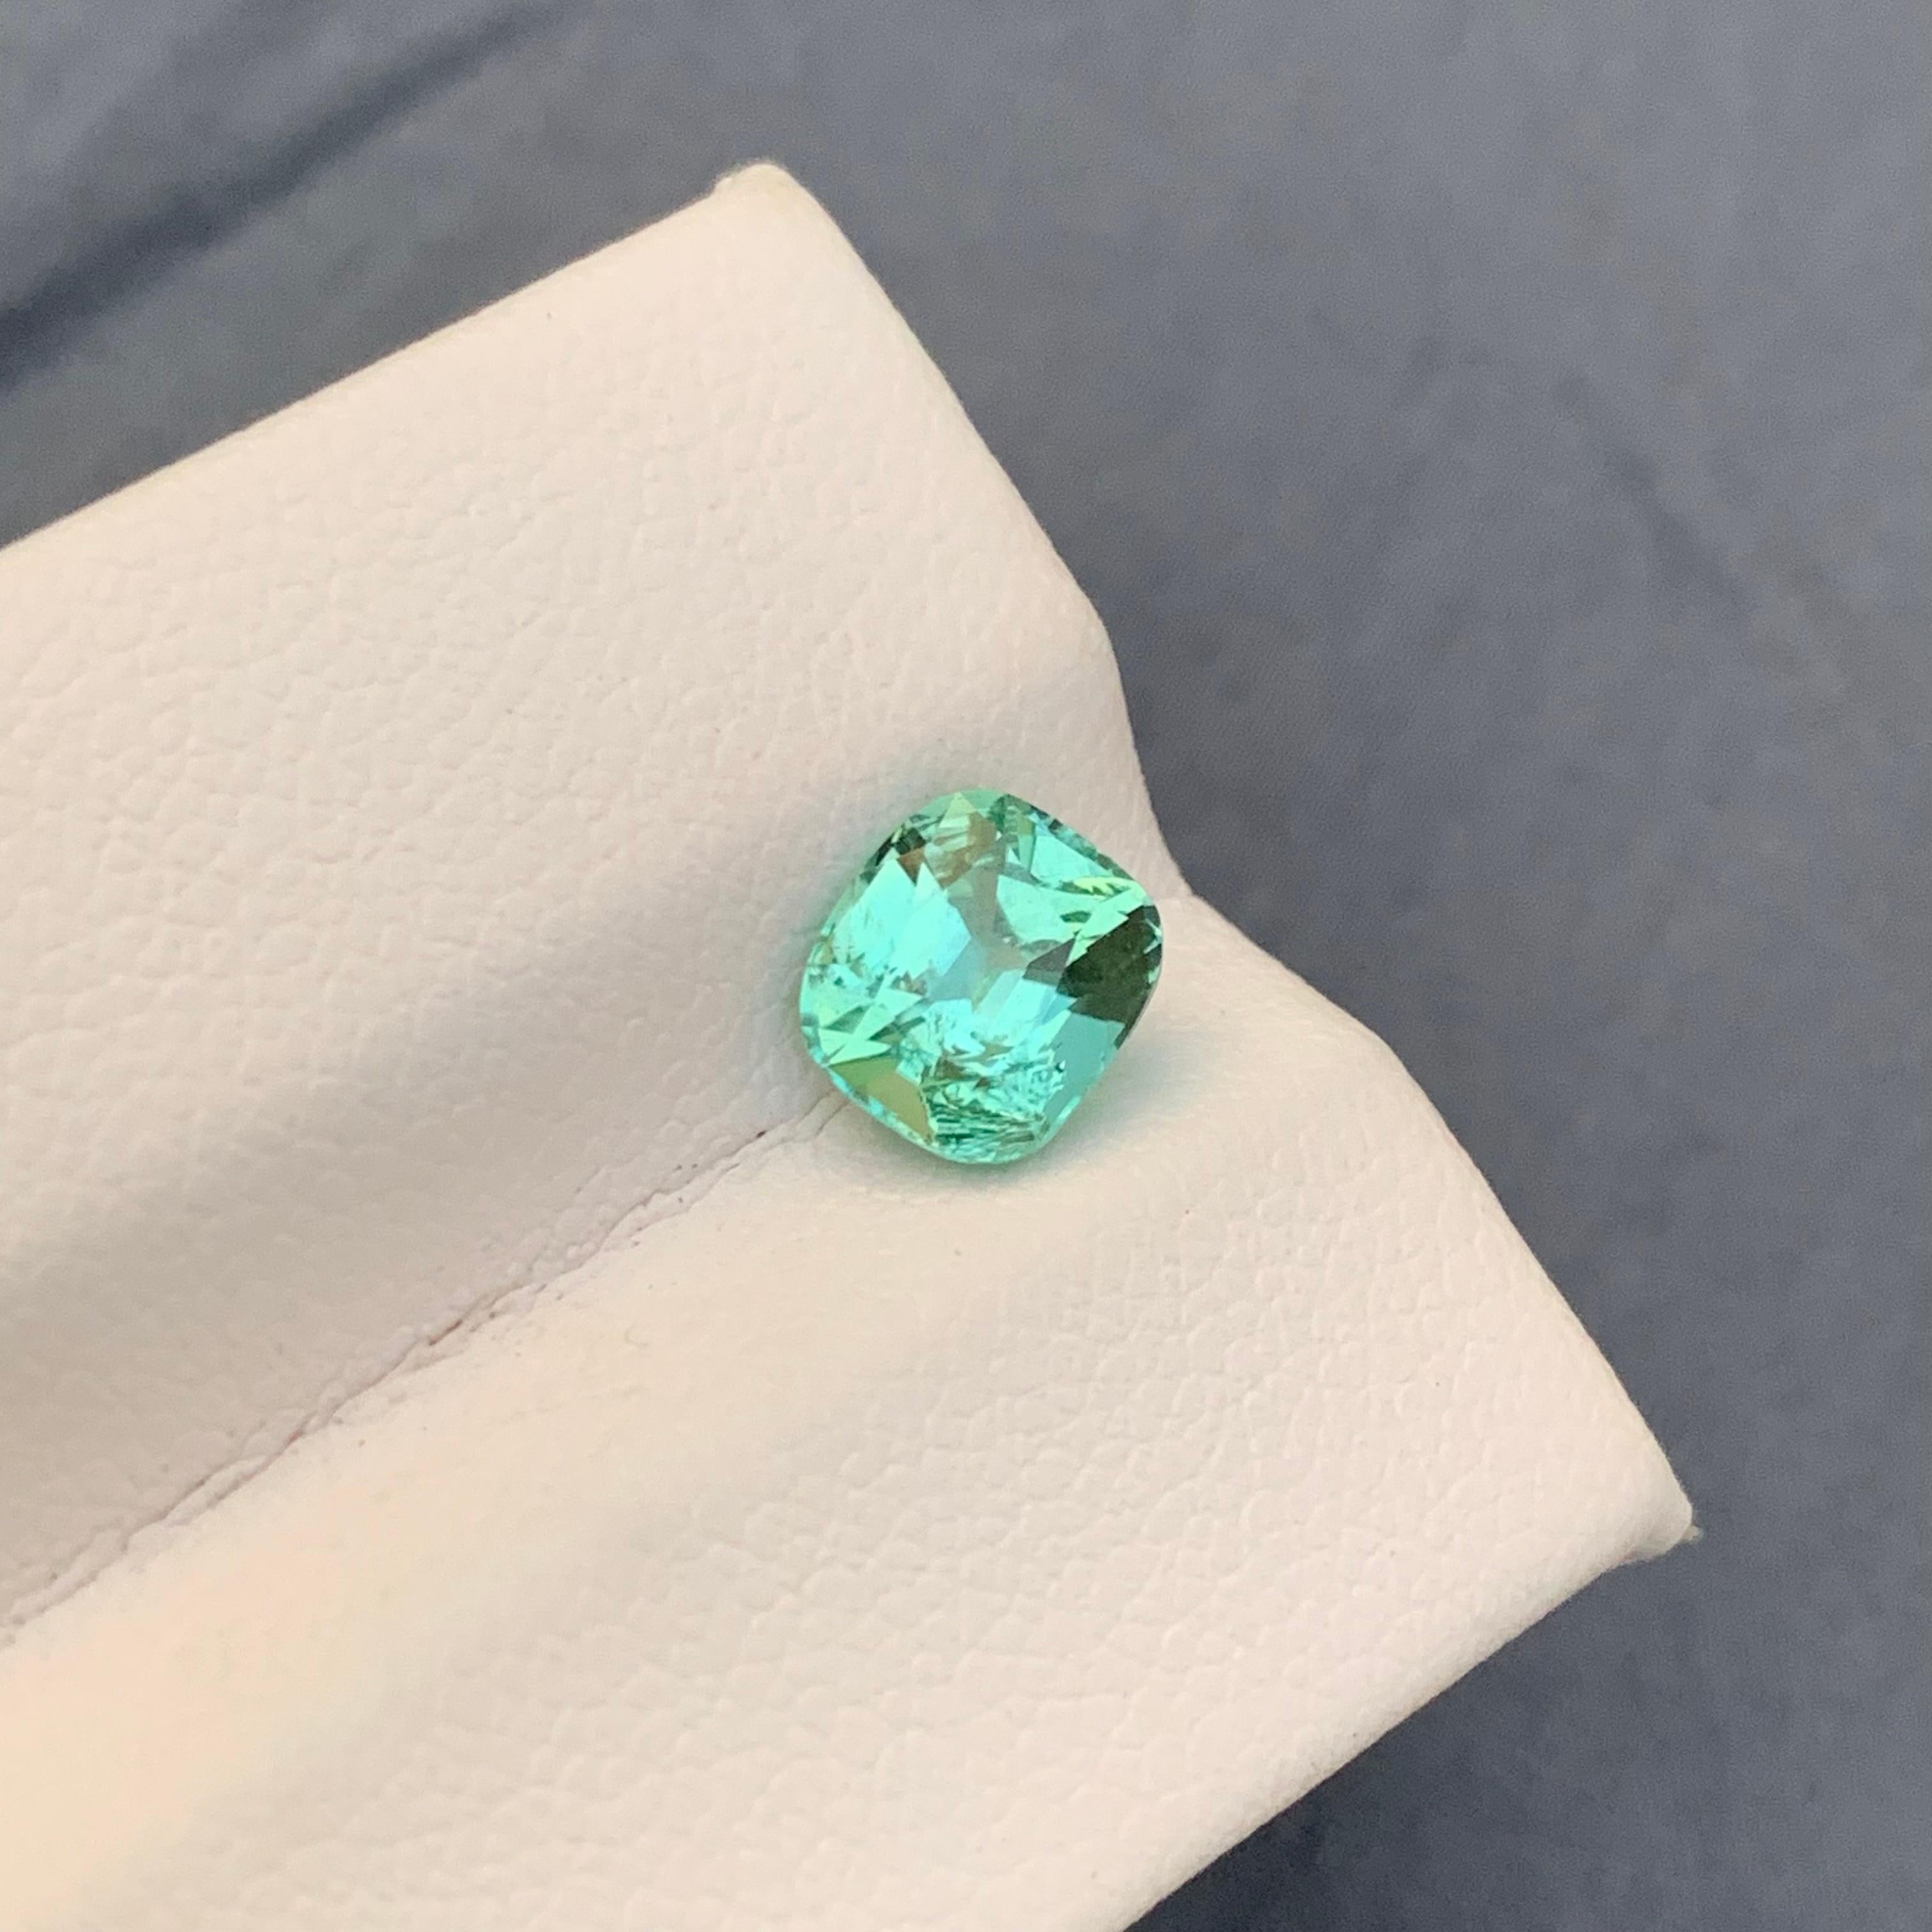 Arts and Crafts 1.50 Carats Faceted Mintgreen Tourmaline Cushion Cut Gemstone Afghan Mine For Sale